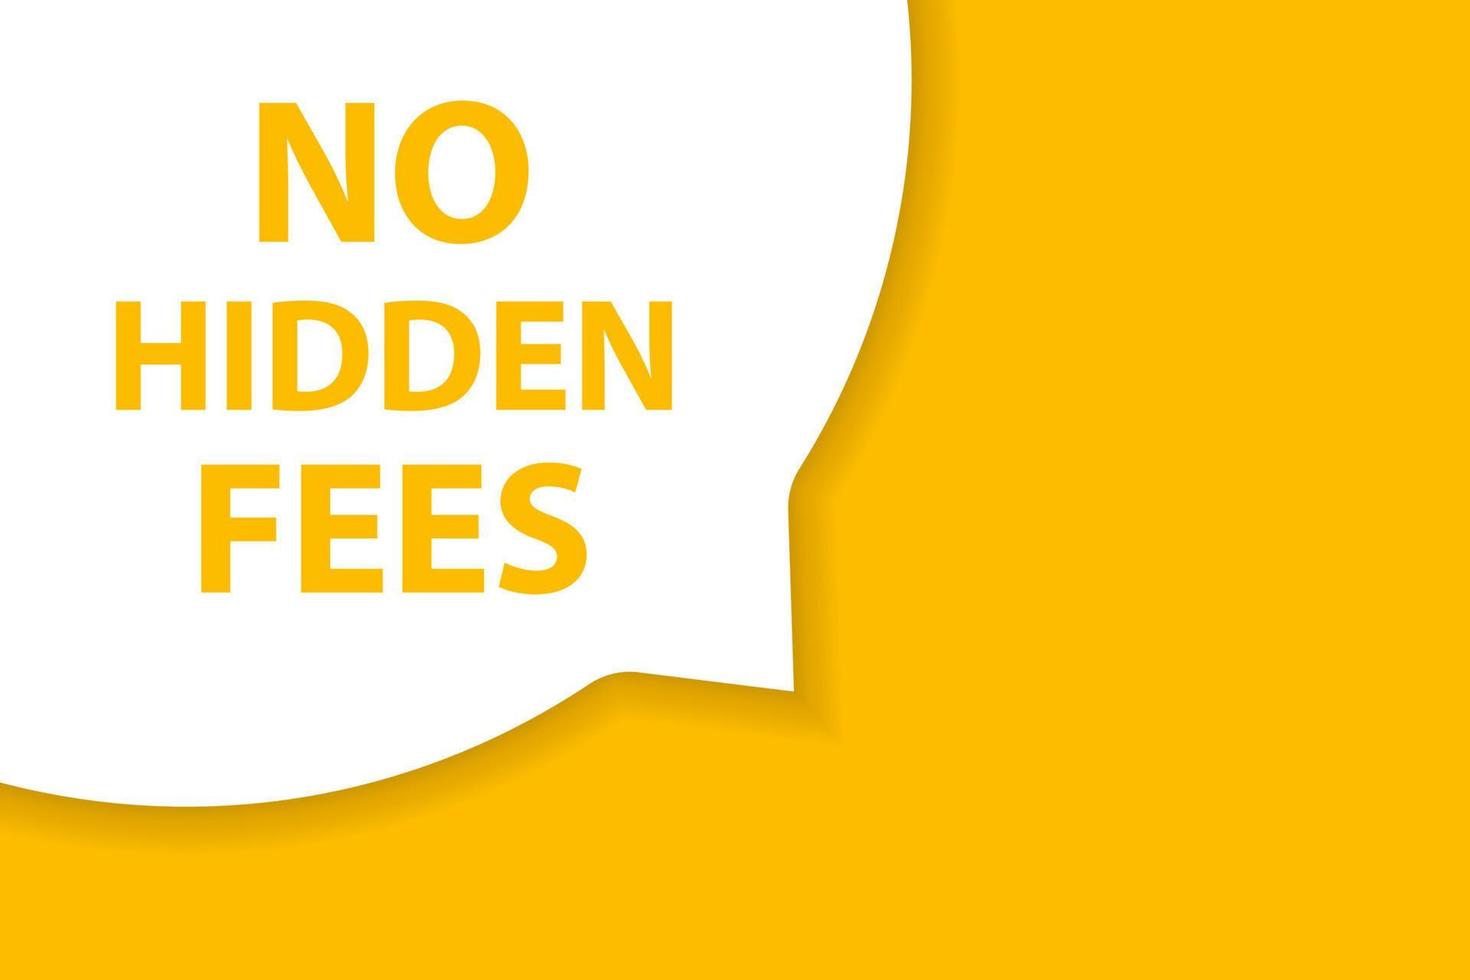 No hidden fees speech bubble banner vector with copy space for business, marketing, flyers, banners, presentations and posters. illustration